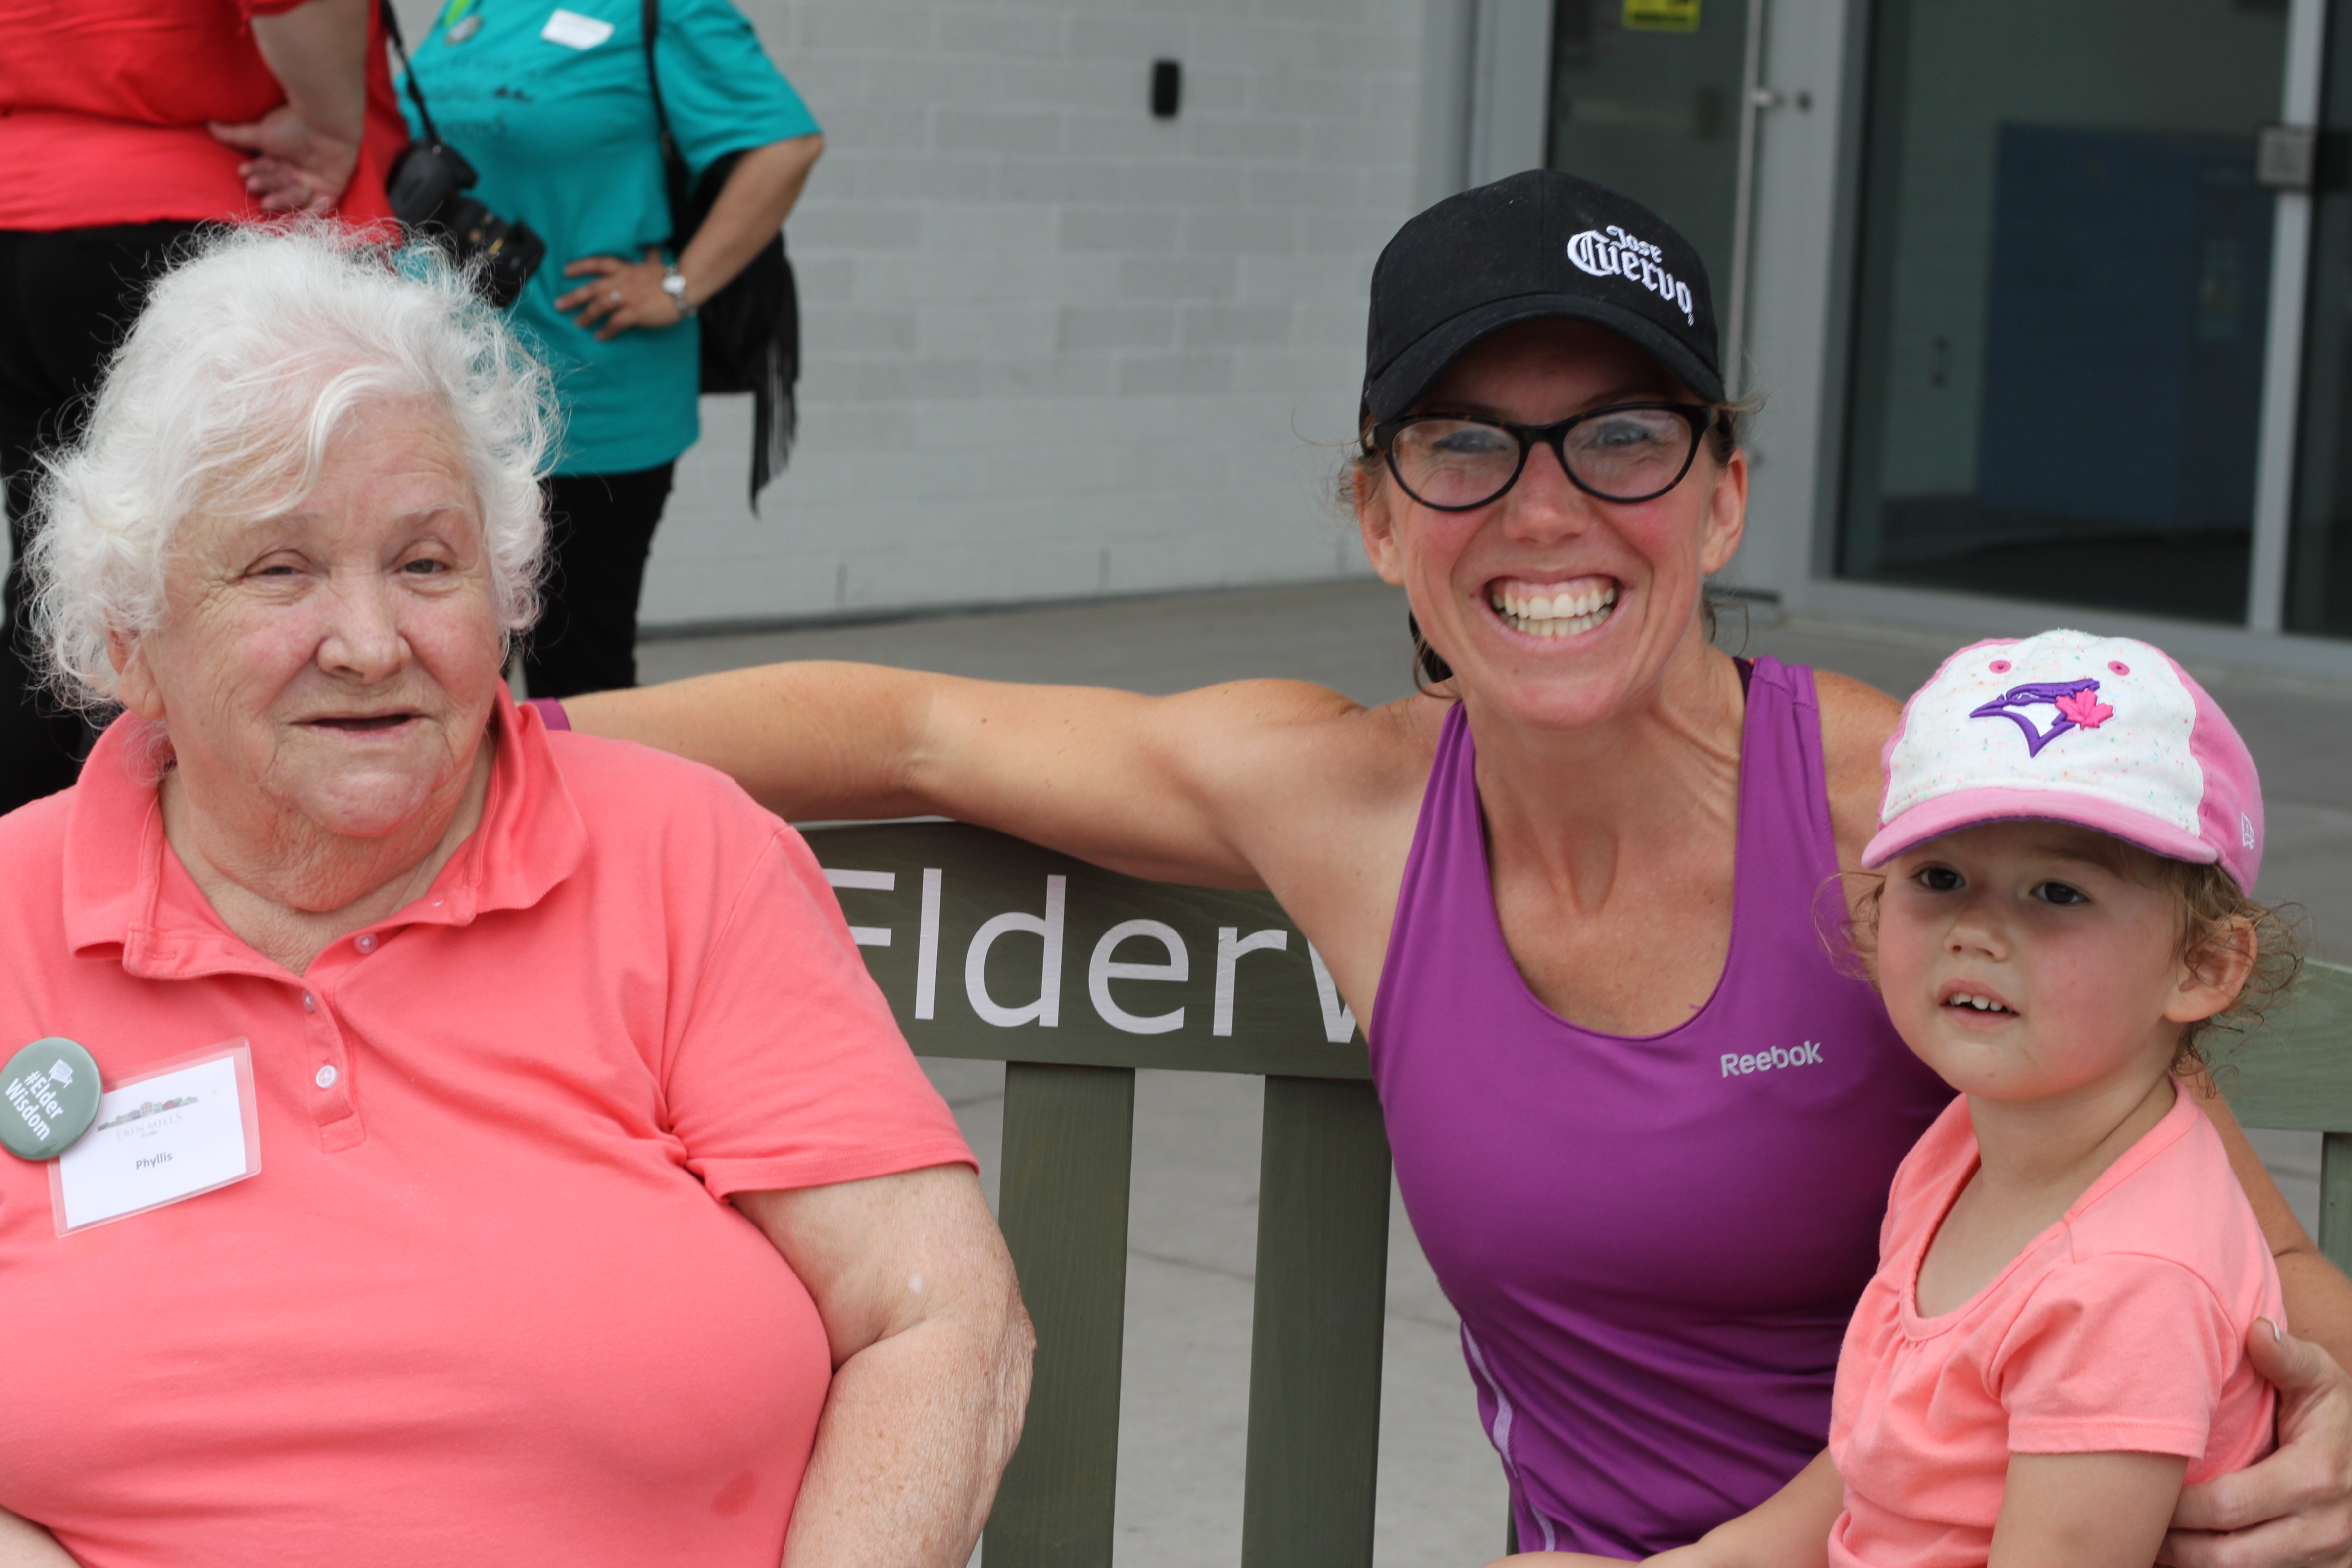 Phyllis, Jennifer and Journey became fast friends while sitting upon the green #ElderWisdom bench.